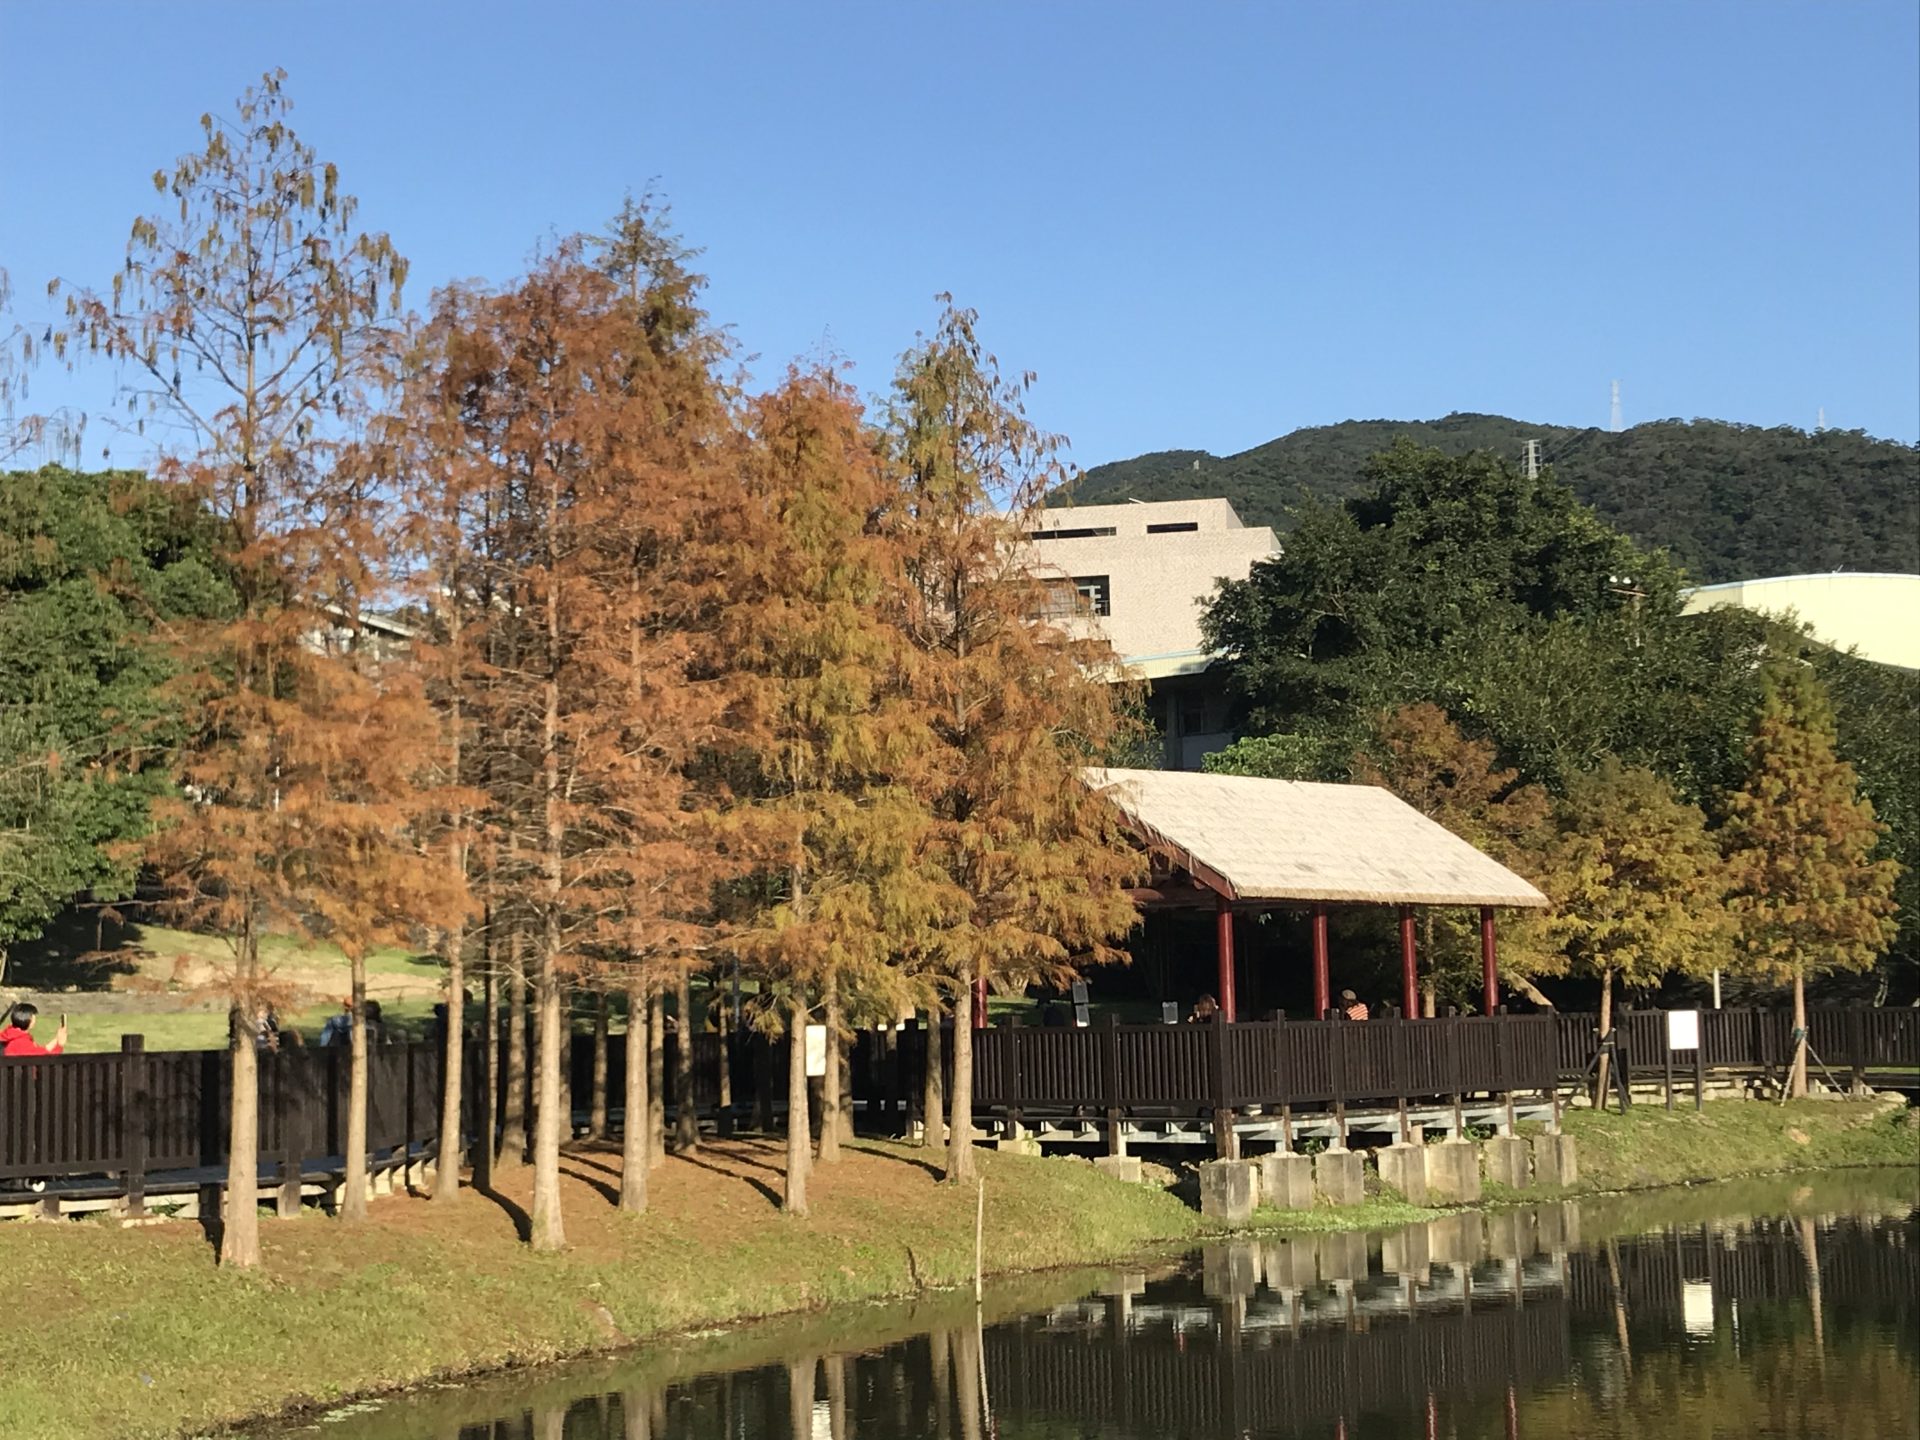 As an iconic scene of Autumn, the bald cypresses in Indigenous People's Park, which is next to the National Palace Museum in Waishuangxi, attract a rush of visitors.